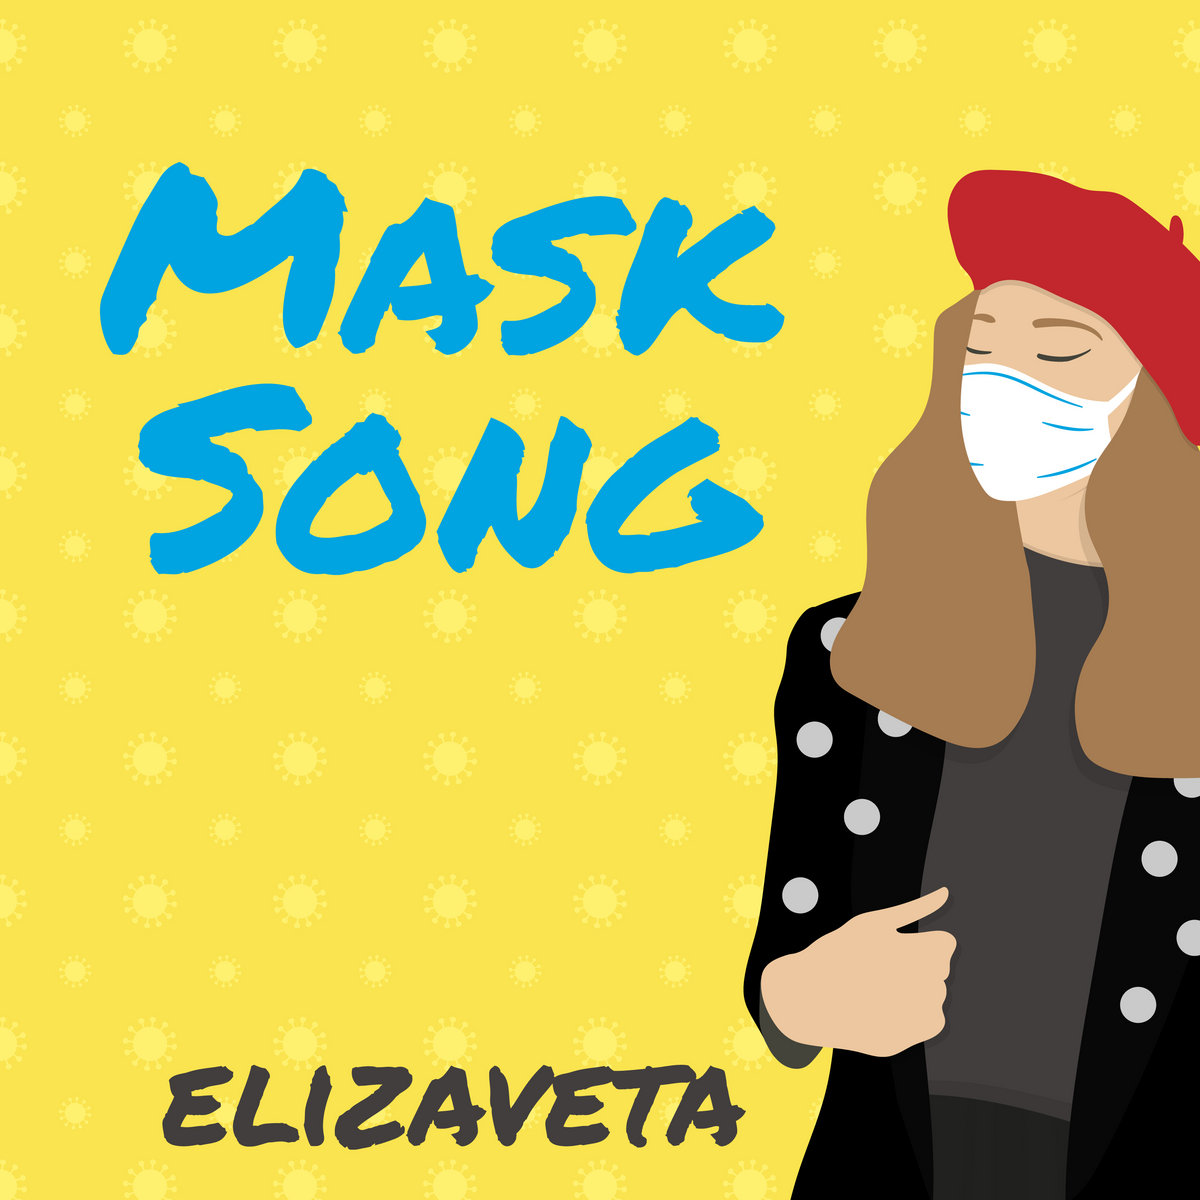 Mask Song